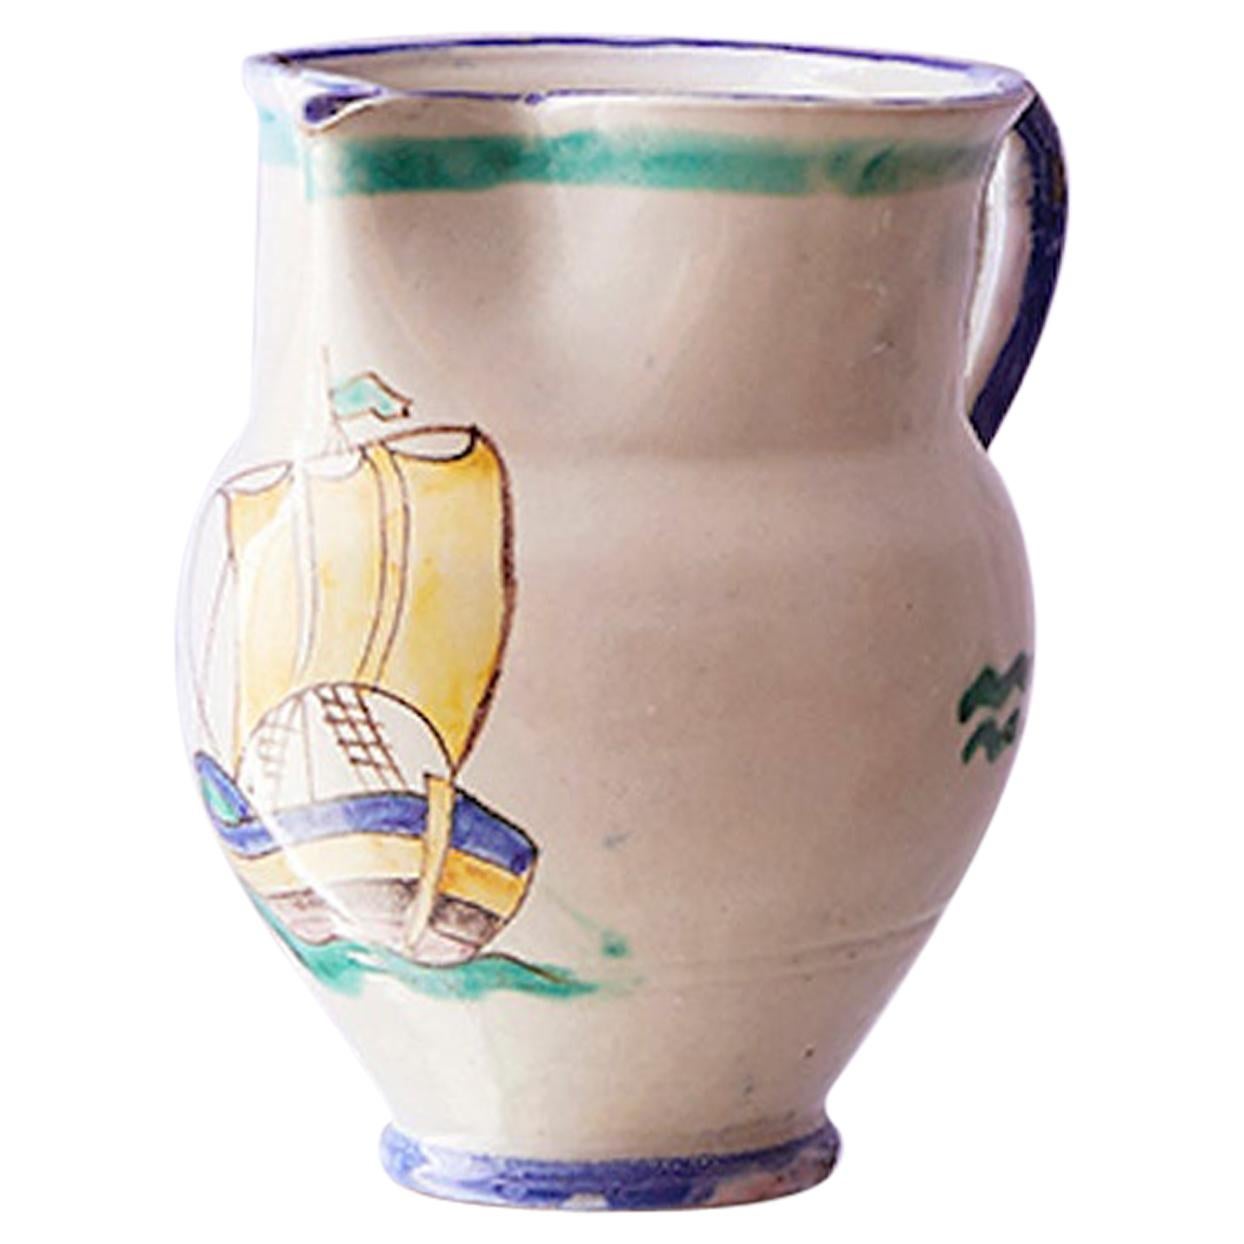 Vintage Ceramic Vietri Pitcher with Colorful Nautical Decorations, Italy, 1960s